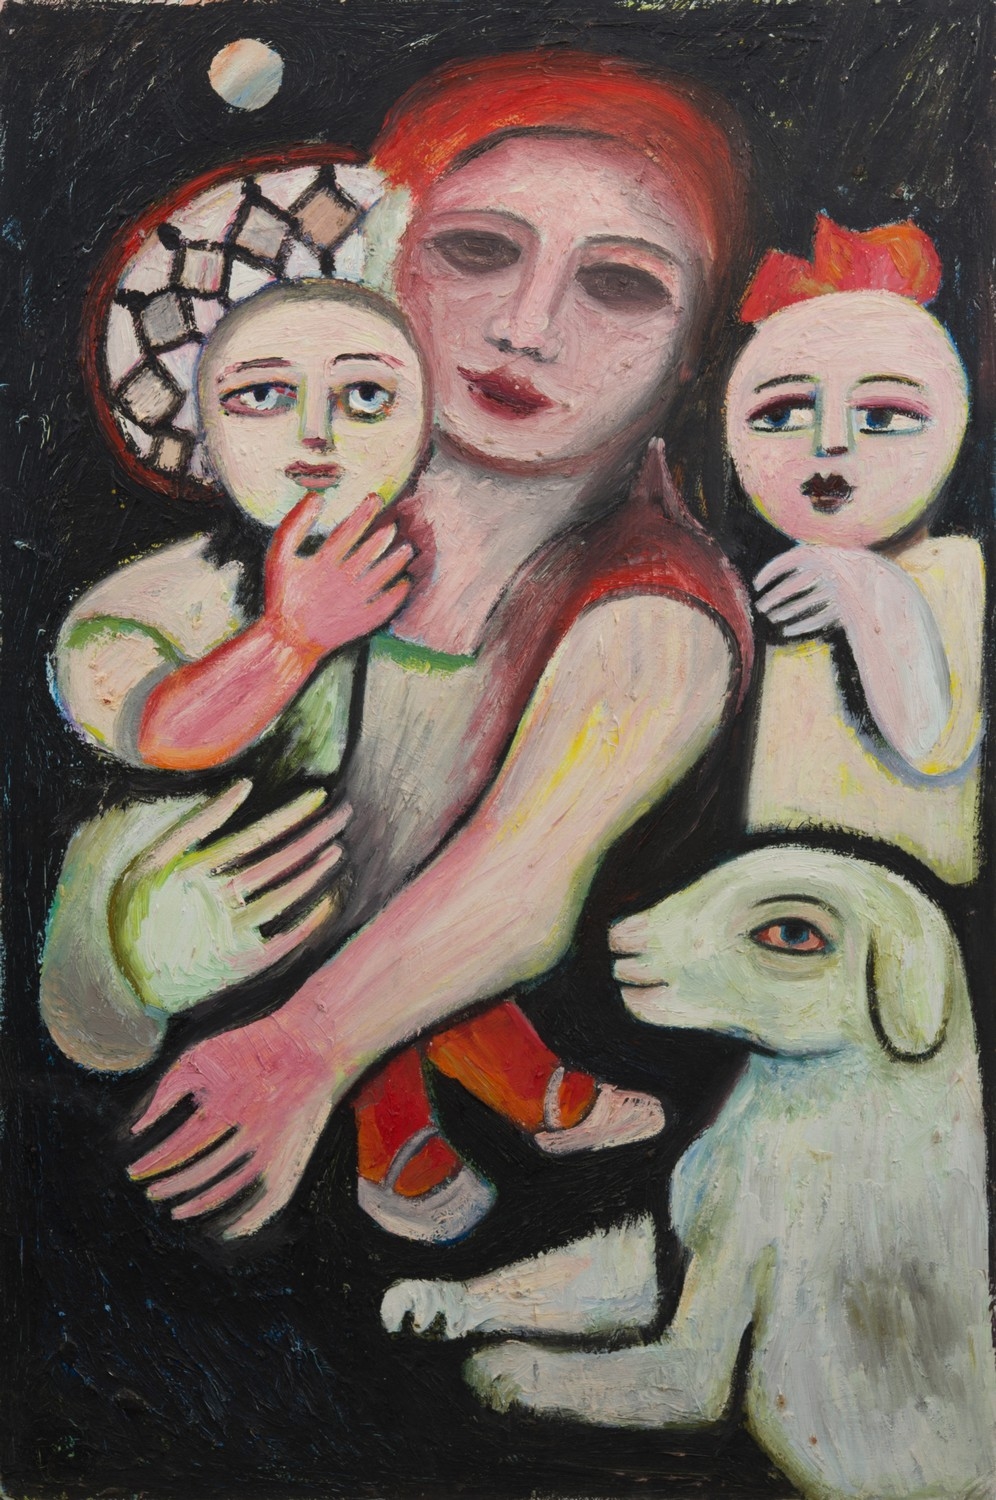 Artwork by Mirka Mora, Family with Dog, Made of oil on canvasboard